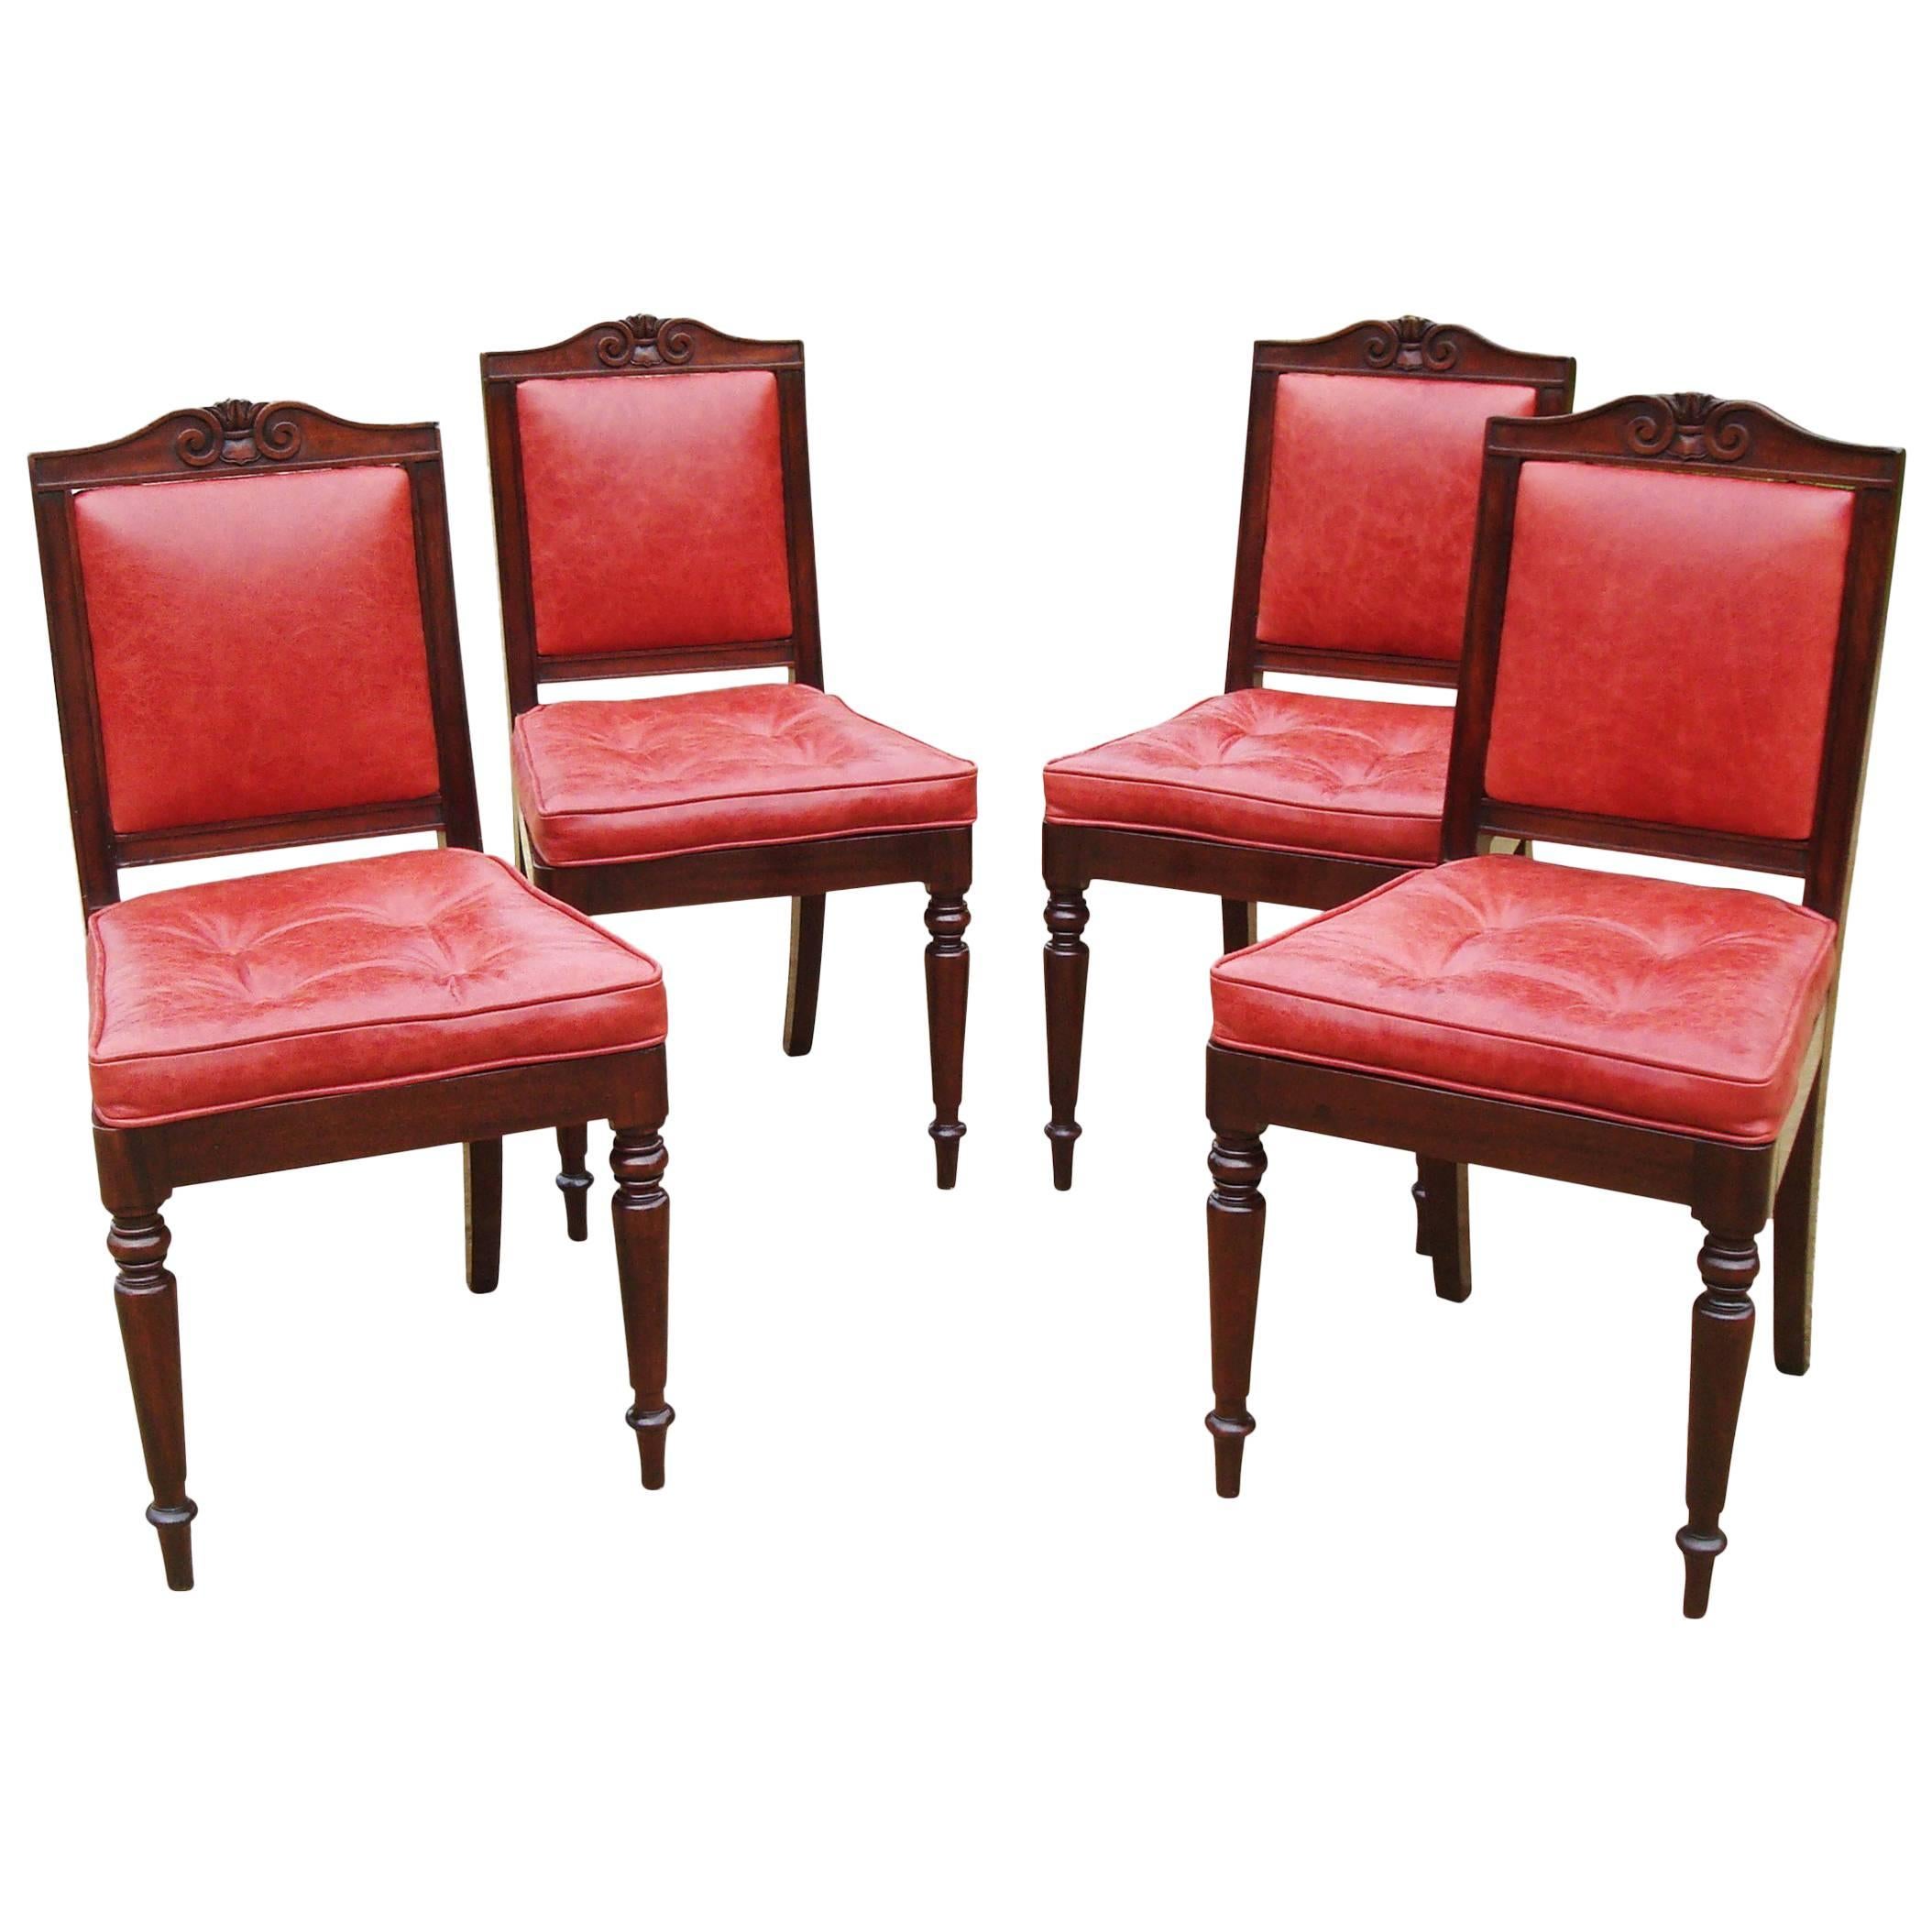 Late Regency Set of Four Mahogany and Leather Side Chairs by Gillows For Sale